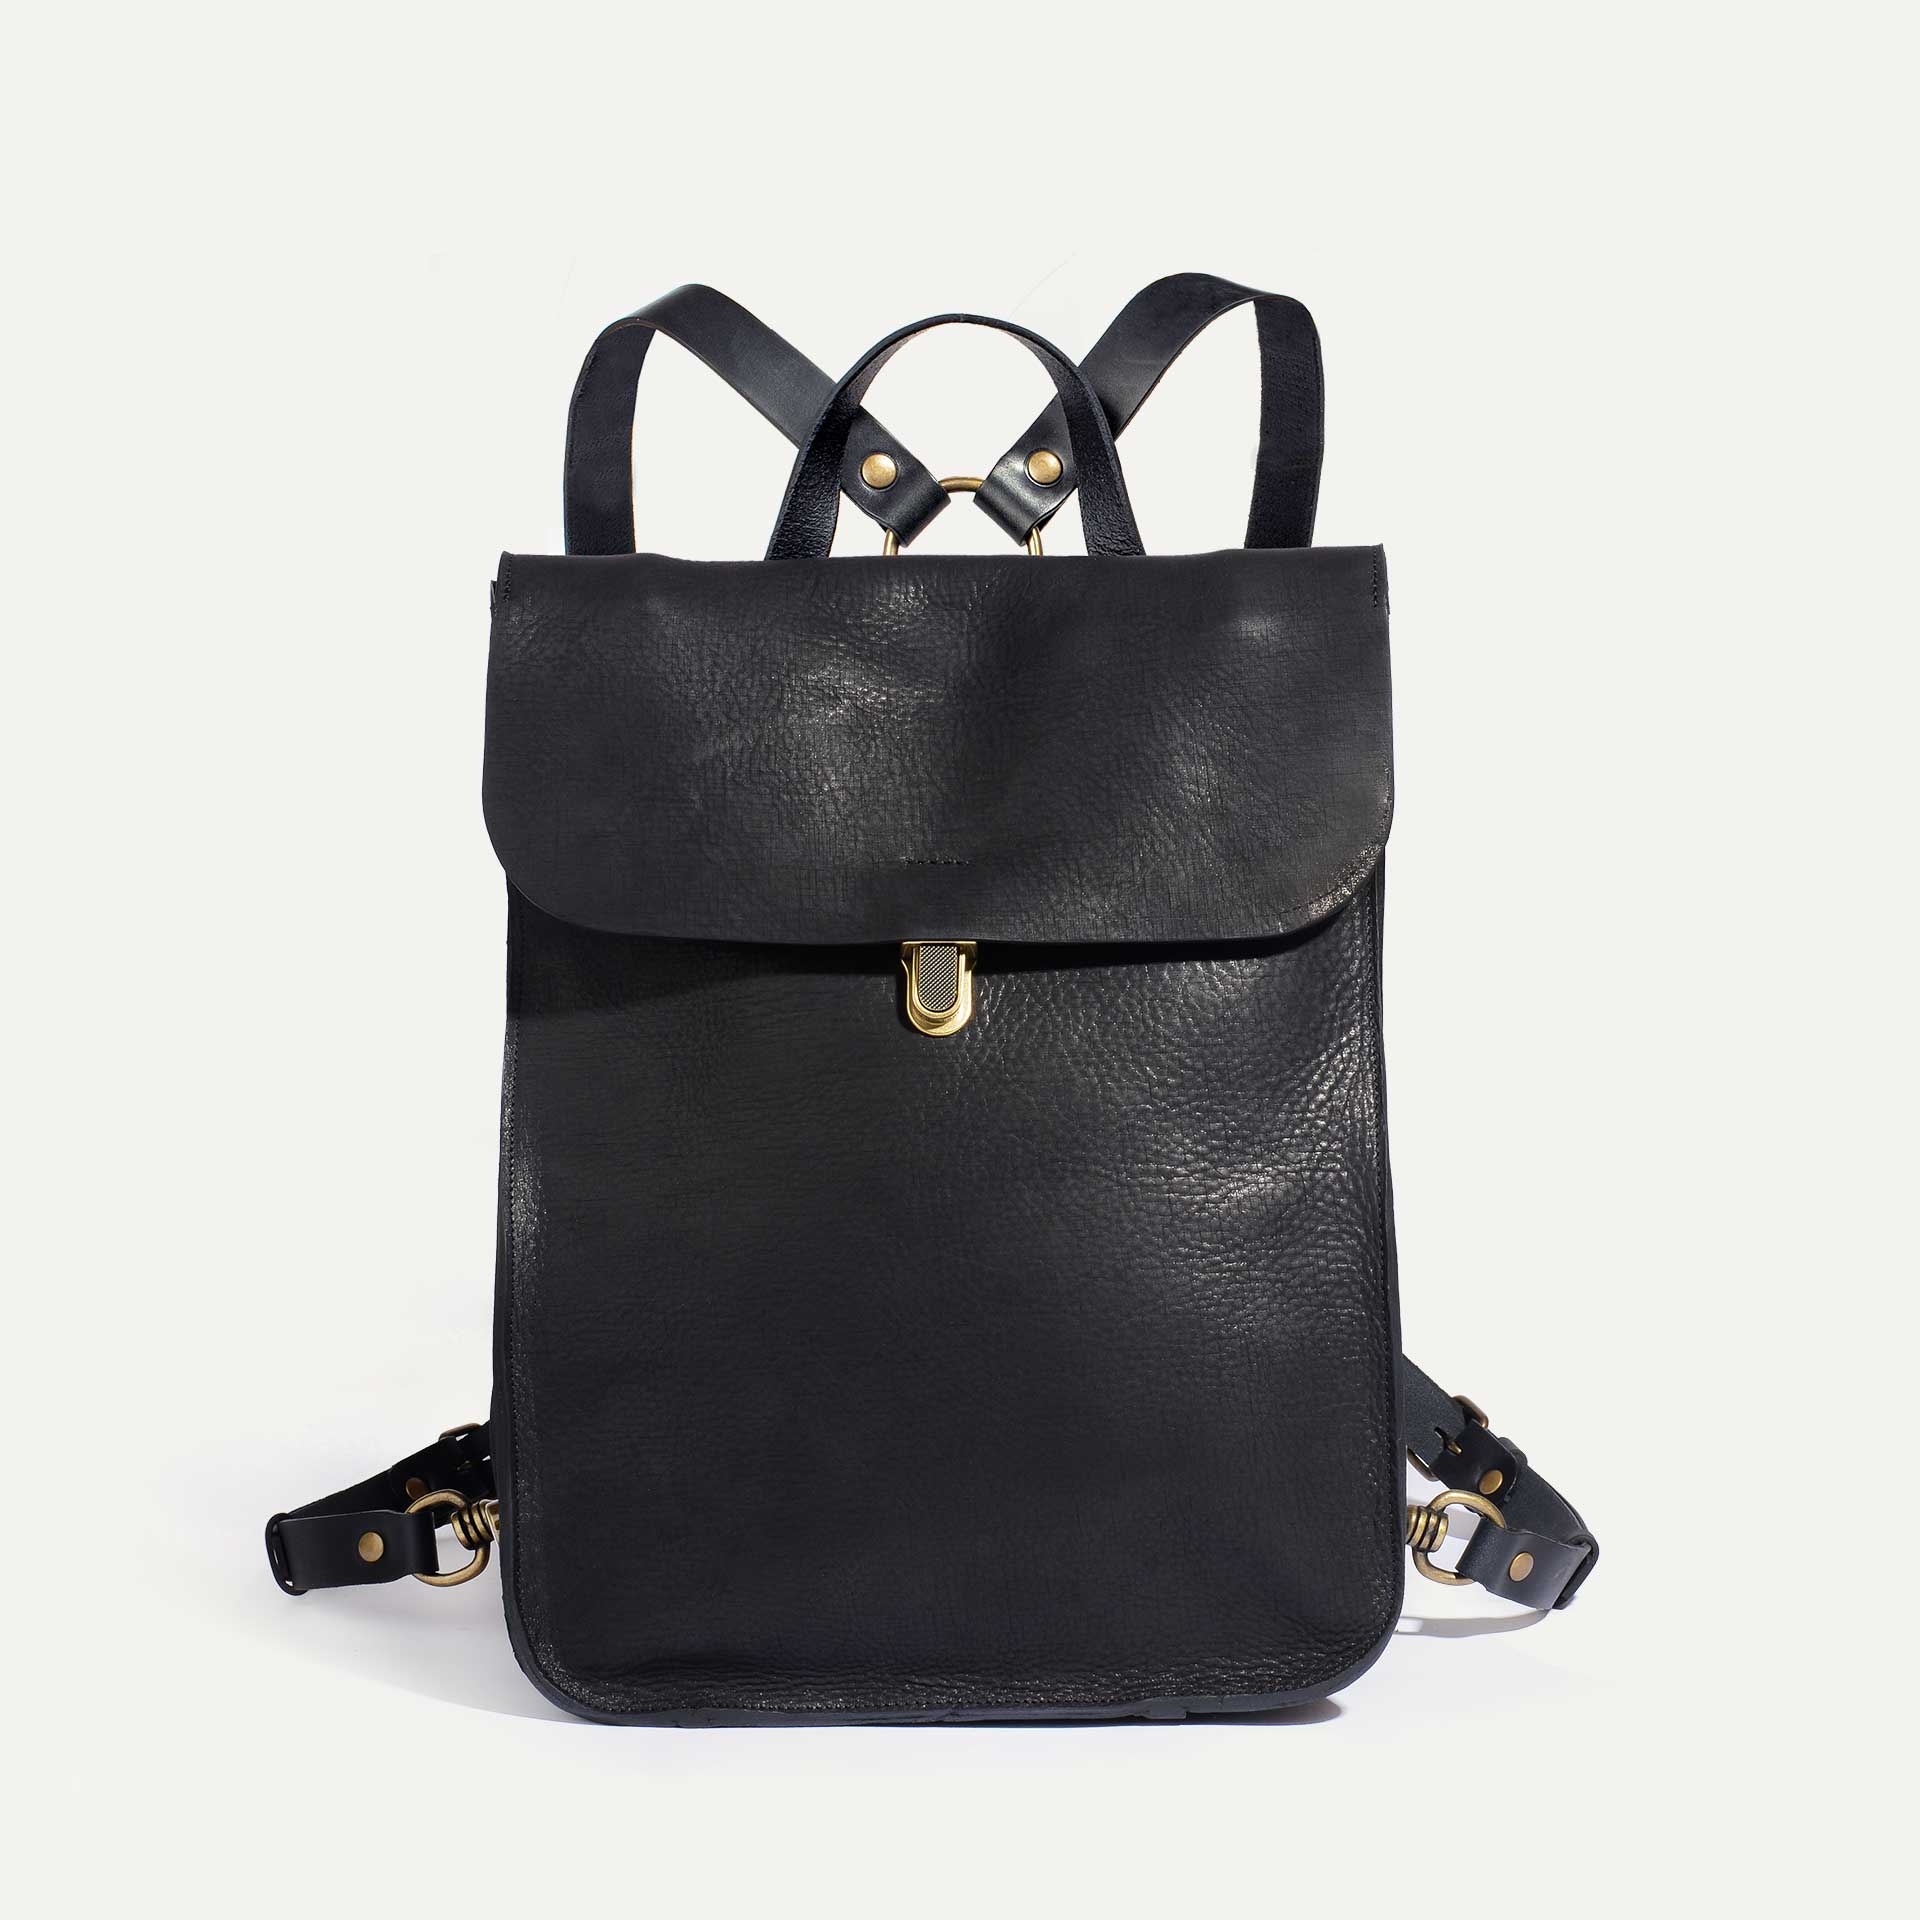 Puncho leather backpack WAX - Charcoal black / Waxed Leather (image n°1)